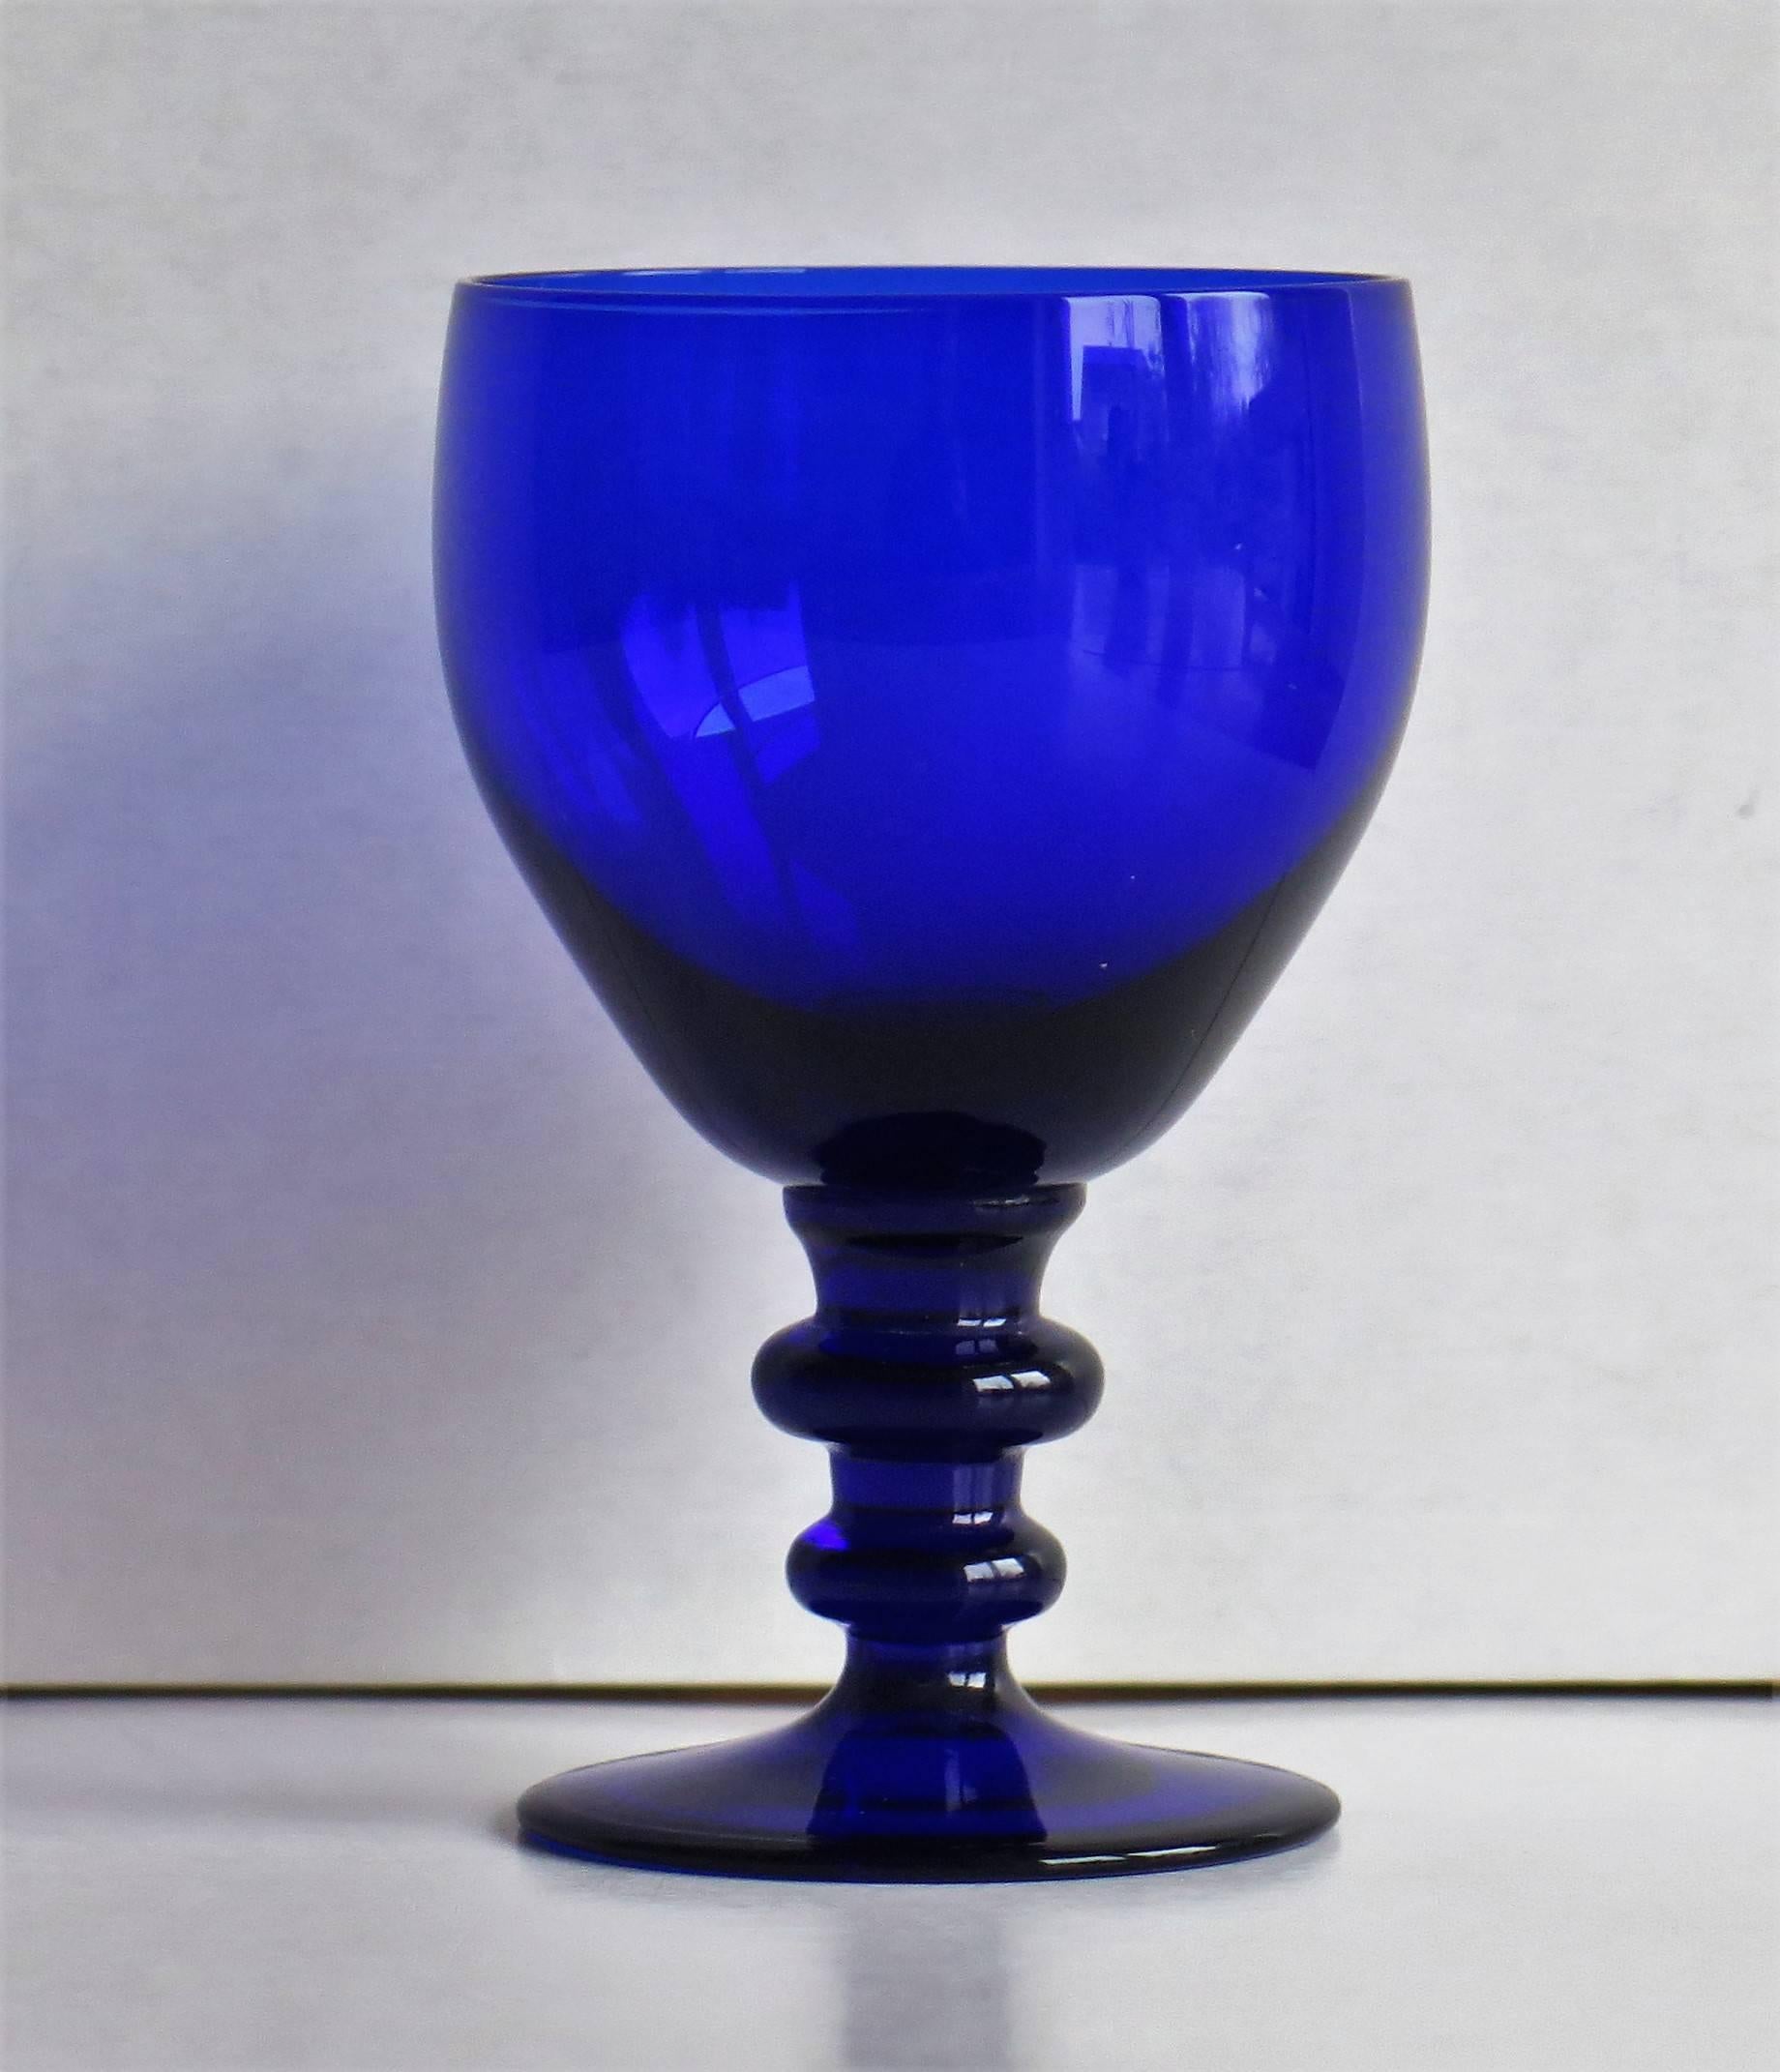 This is a good English wine drinking glass from the mid-19th century.

The glass is a 